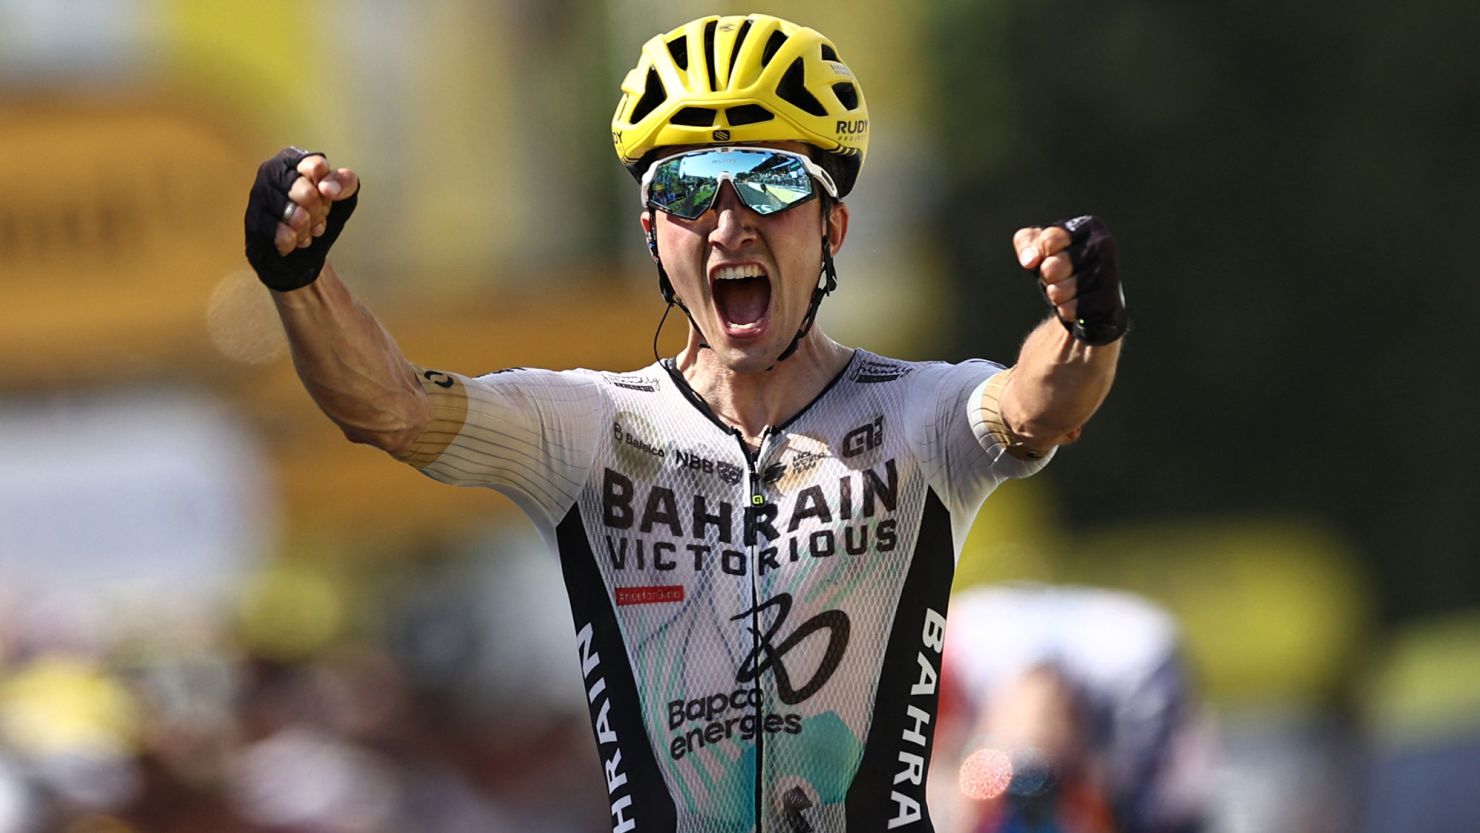 TOPSHOT - Bahrain - Victorious' Spanish rider Pello Bilbao cycles to the finish line to win the 10th stage of the 110th edition of the Tour de France cycling race, 167,5 km between Vulcania and Issoire, in the Massif Central highlands in central France, on July 11, 2023. (Photo by Anne-Christine POUJOULAT / AFP) (Photo by ANNE-CHRISTINE POUJOULAT/AFP via Getty Images)